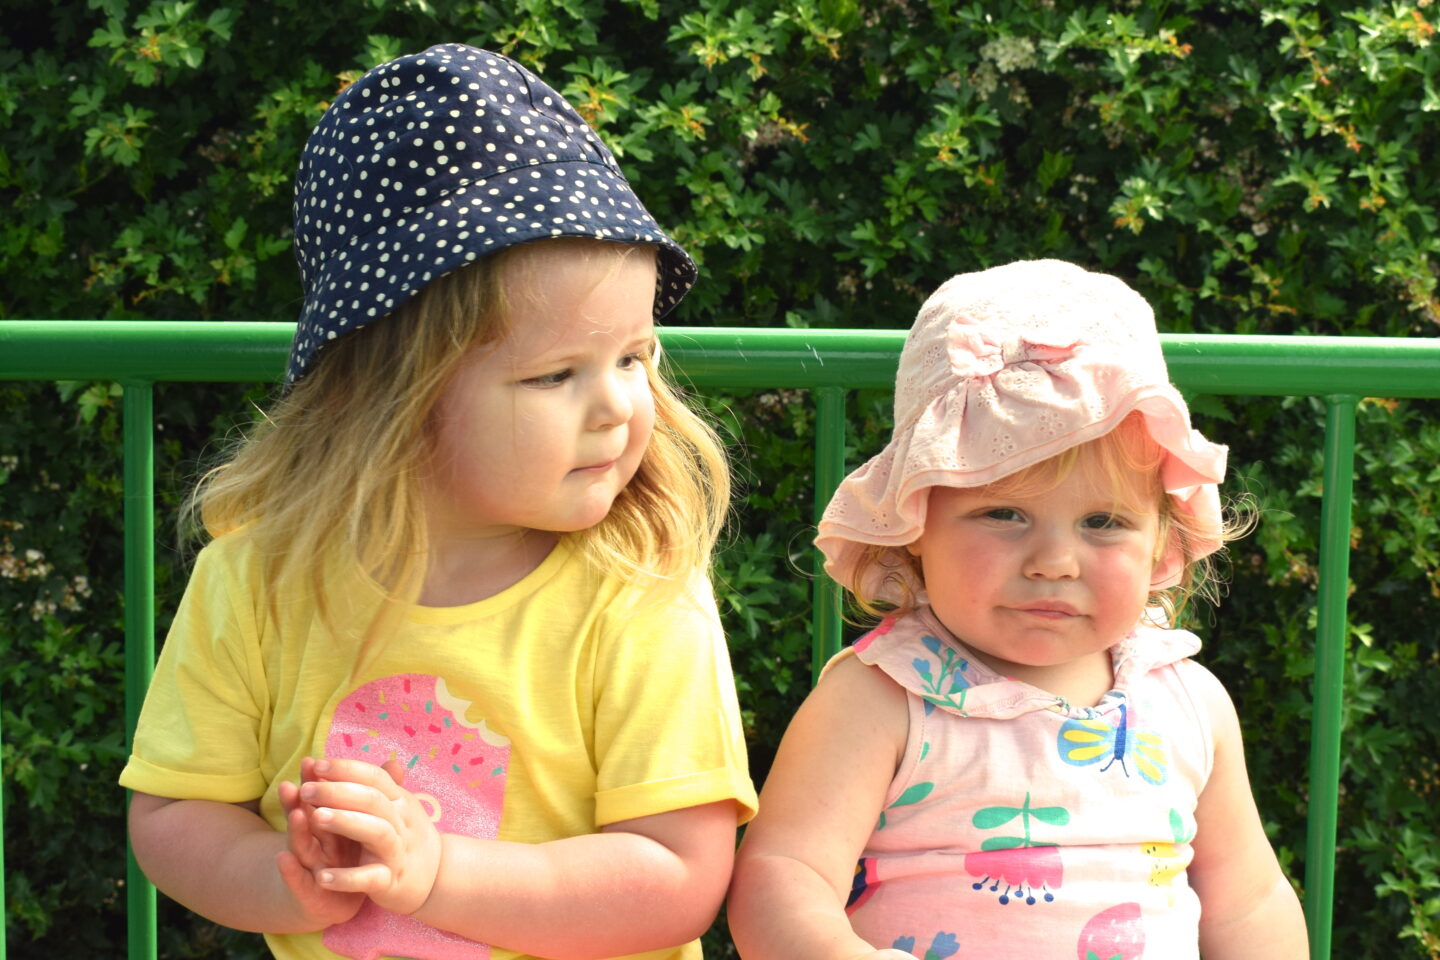 Two and one year old sisters sitting on a park bench together